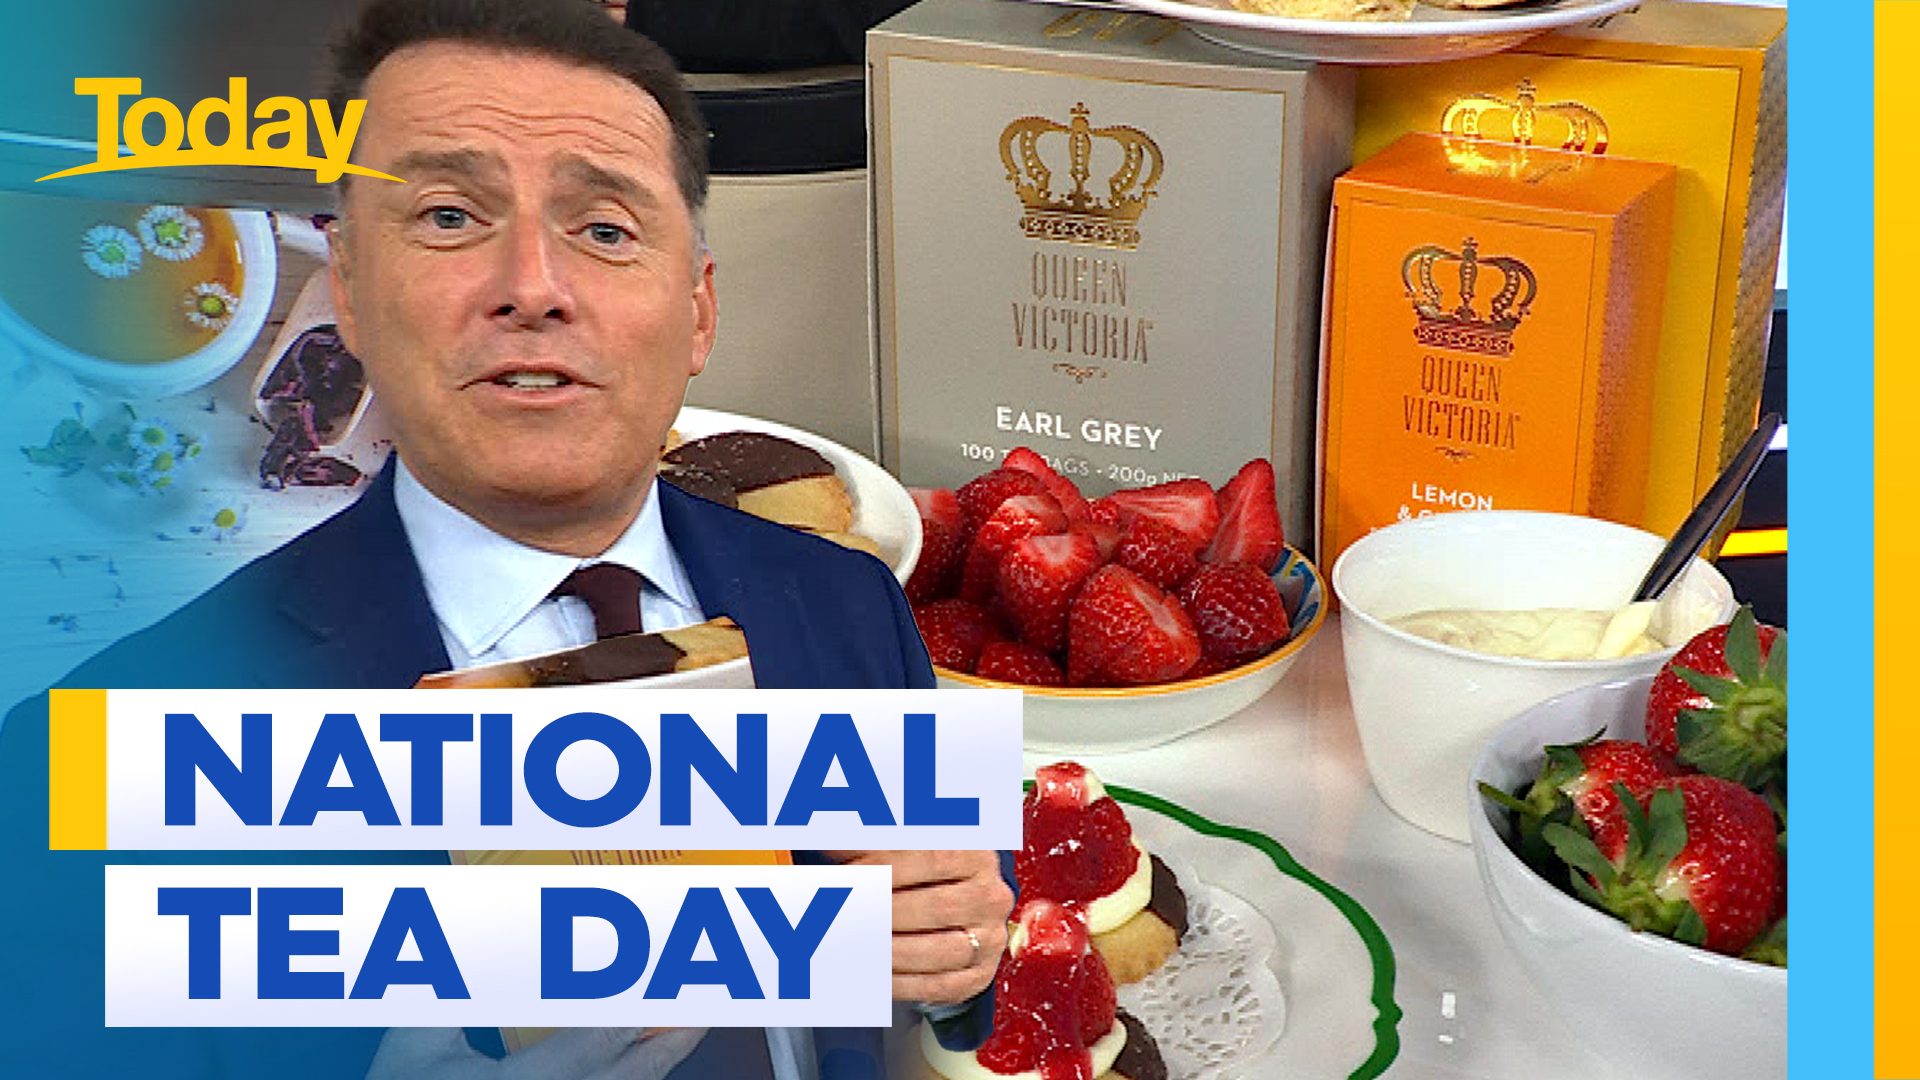 Celebrate National Tea Day with the Today hosts